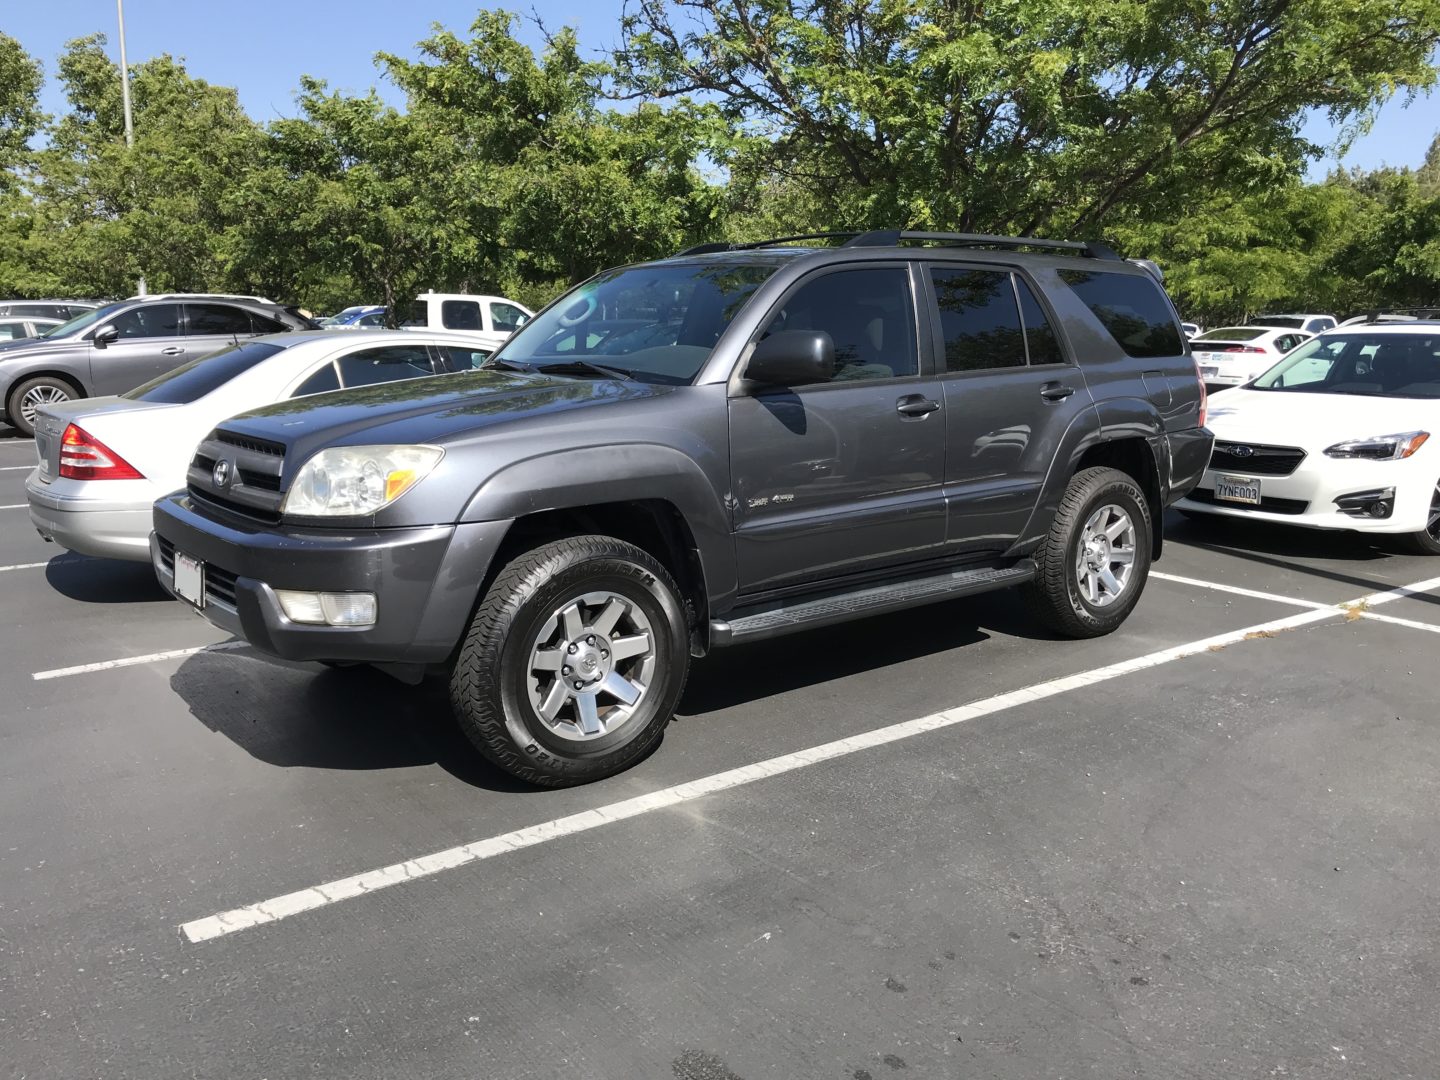 Upgrading to 5th Gen Wheels: 4th Gen Toyota 4Runner - The Track Ahead